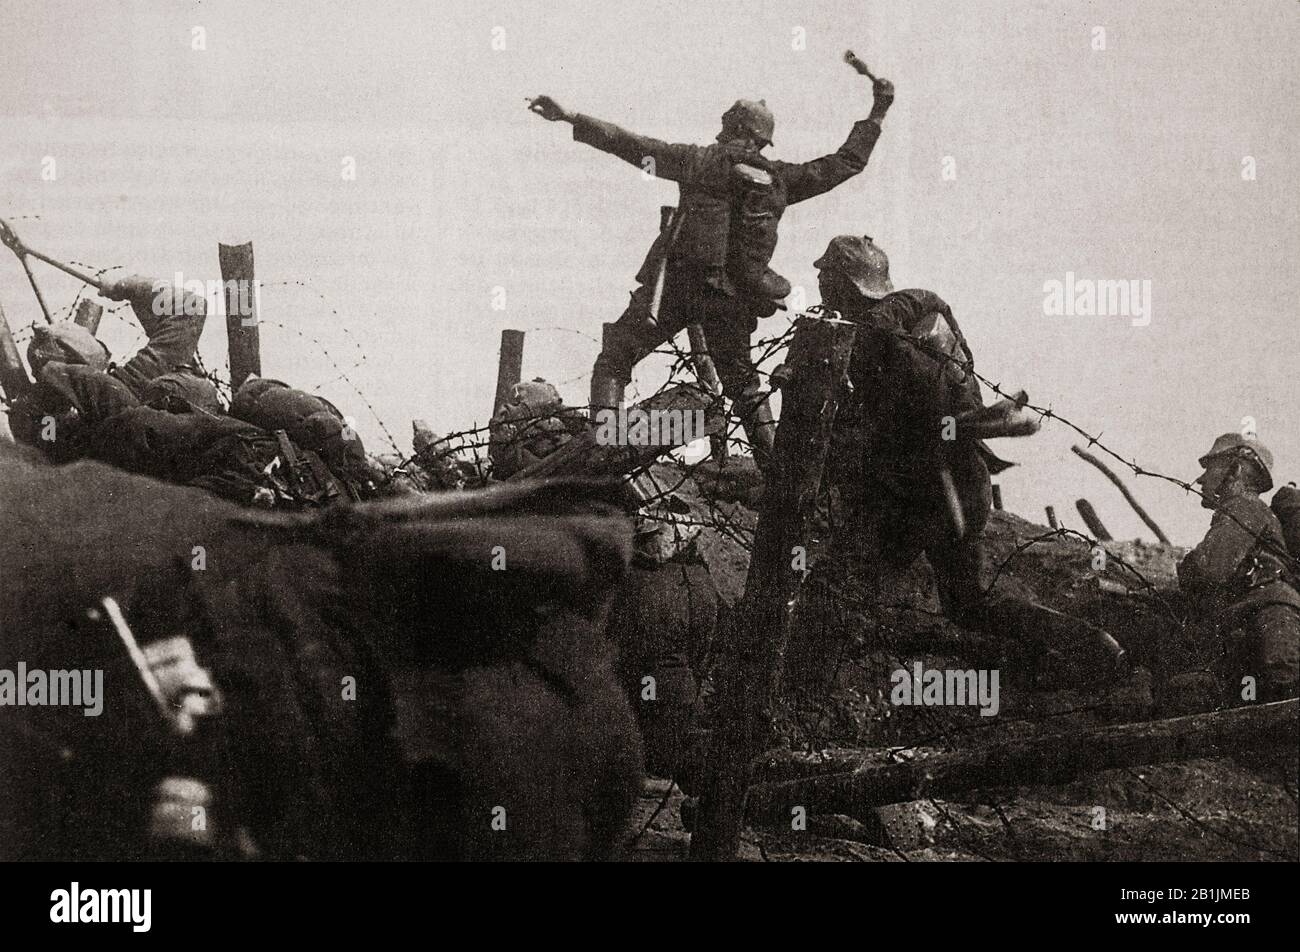 A French soldier throwing a hand grenade towards German lines during the Battle of Verdun of 1916. The battle lasted for 302 days, the longest and one of the most costly in human history during which the French suffered 377,231 casualties and the Germans 337,000, a total of 714,231. In France, the battle came to symbolise the determination of the French Army and the destructiveness of the war. Stock Photo